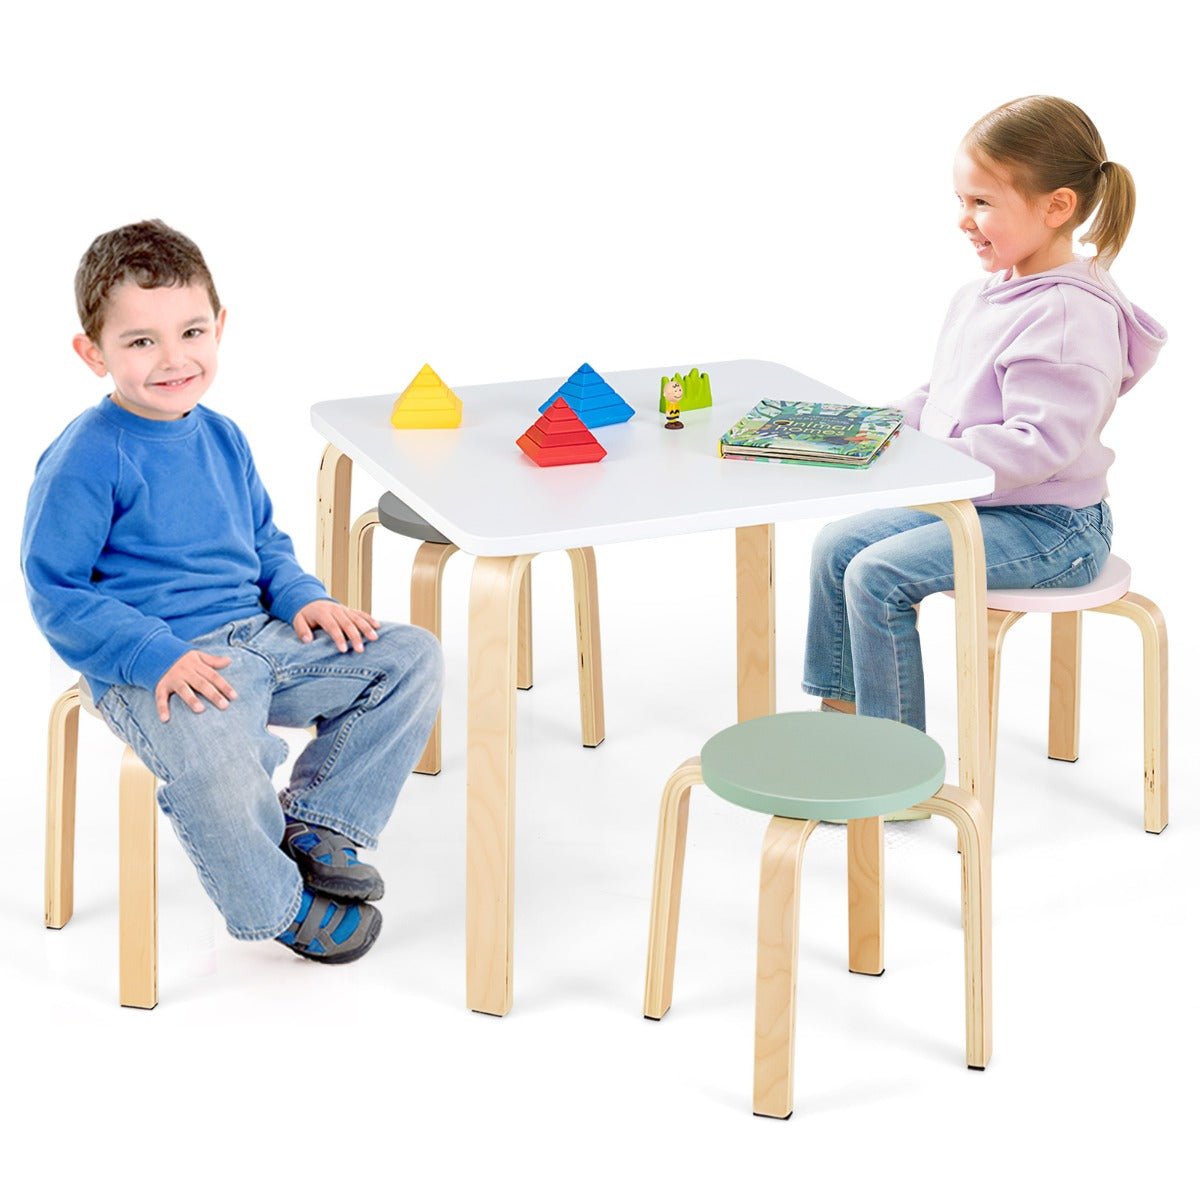 Macaroon Kids Furniture: 5-Piece Table & Chair Set for Fun and Learning